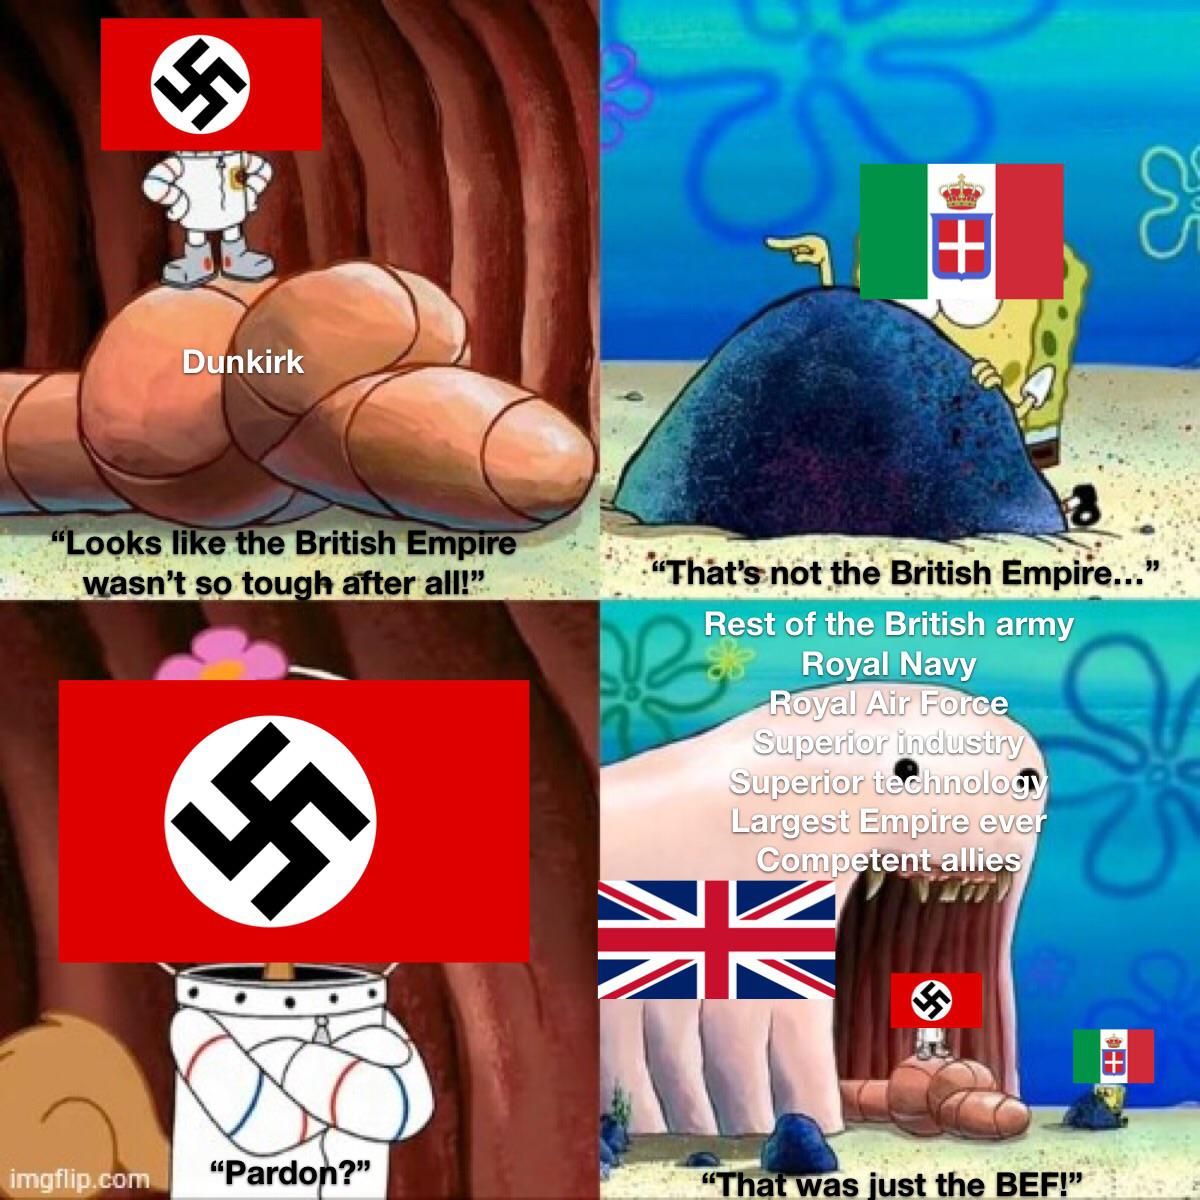 We shitting on the Wehraboos again?